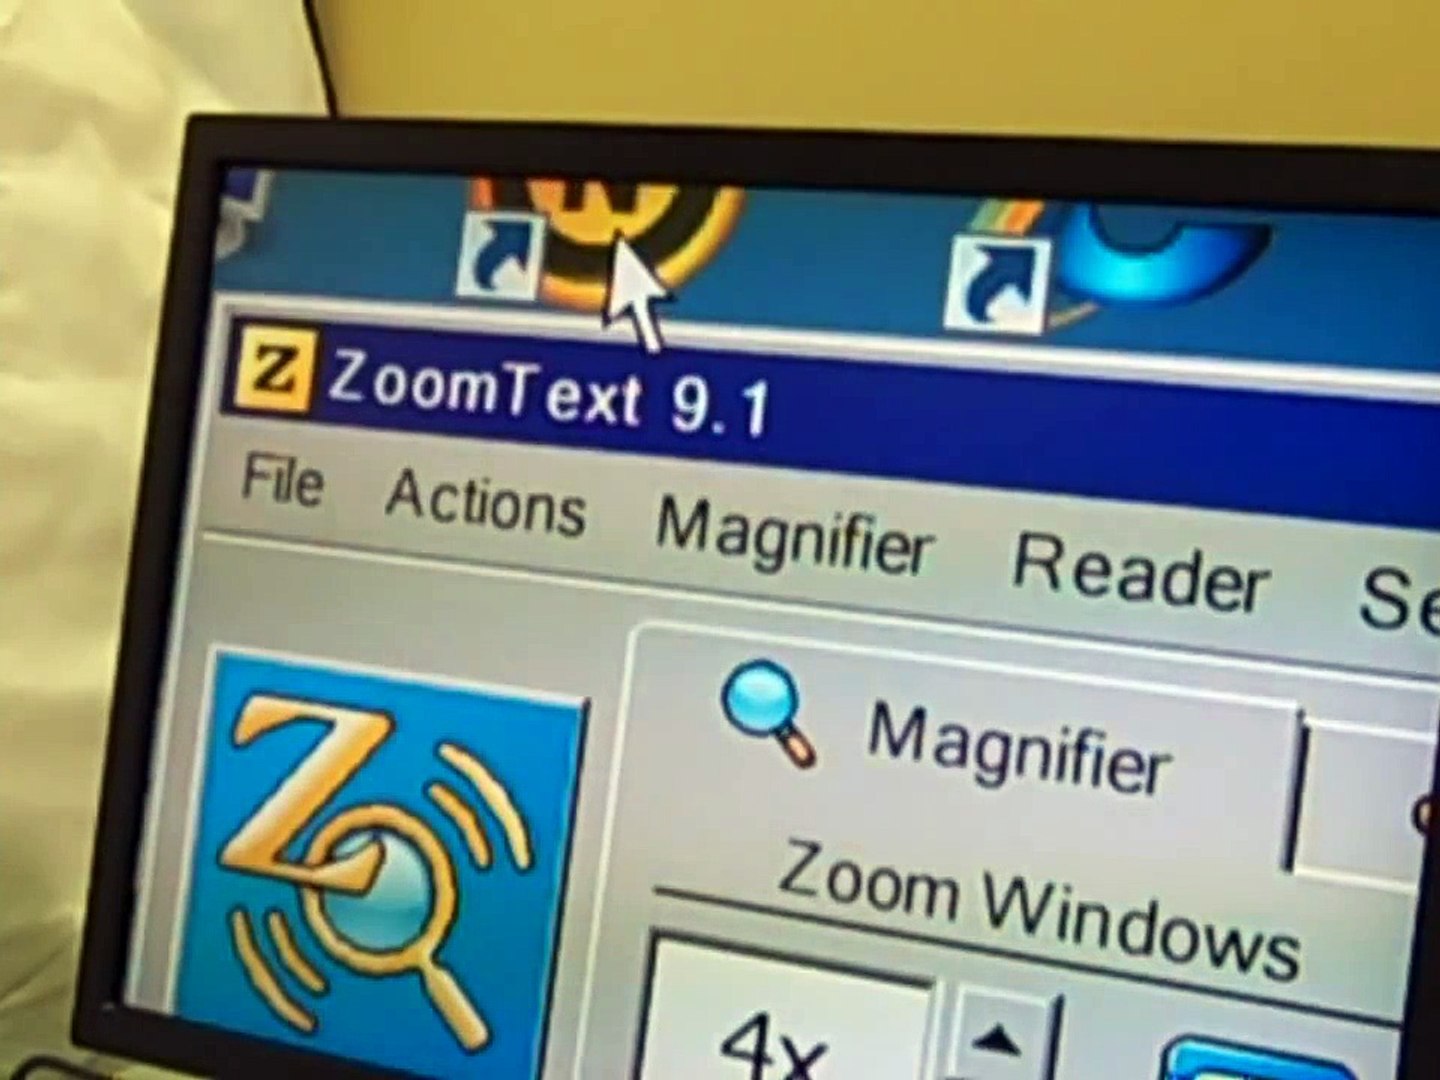 zoomtext magnifier demo